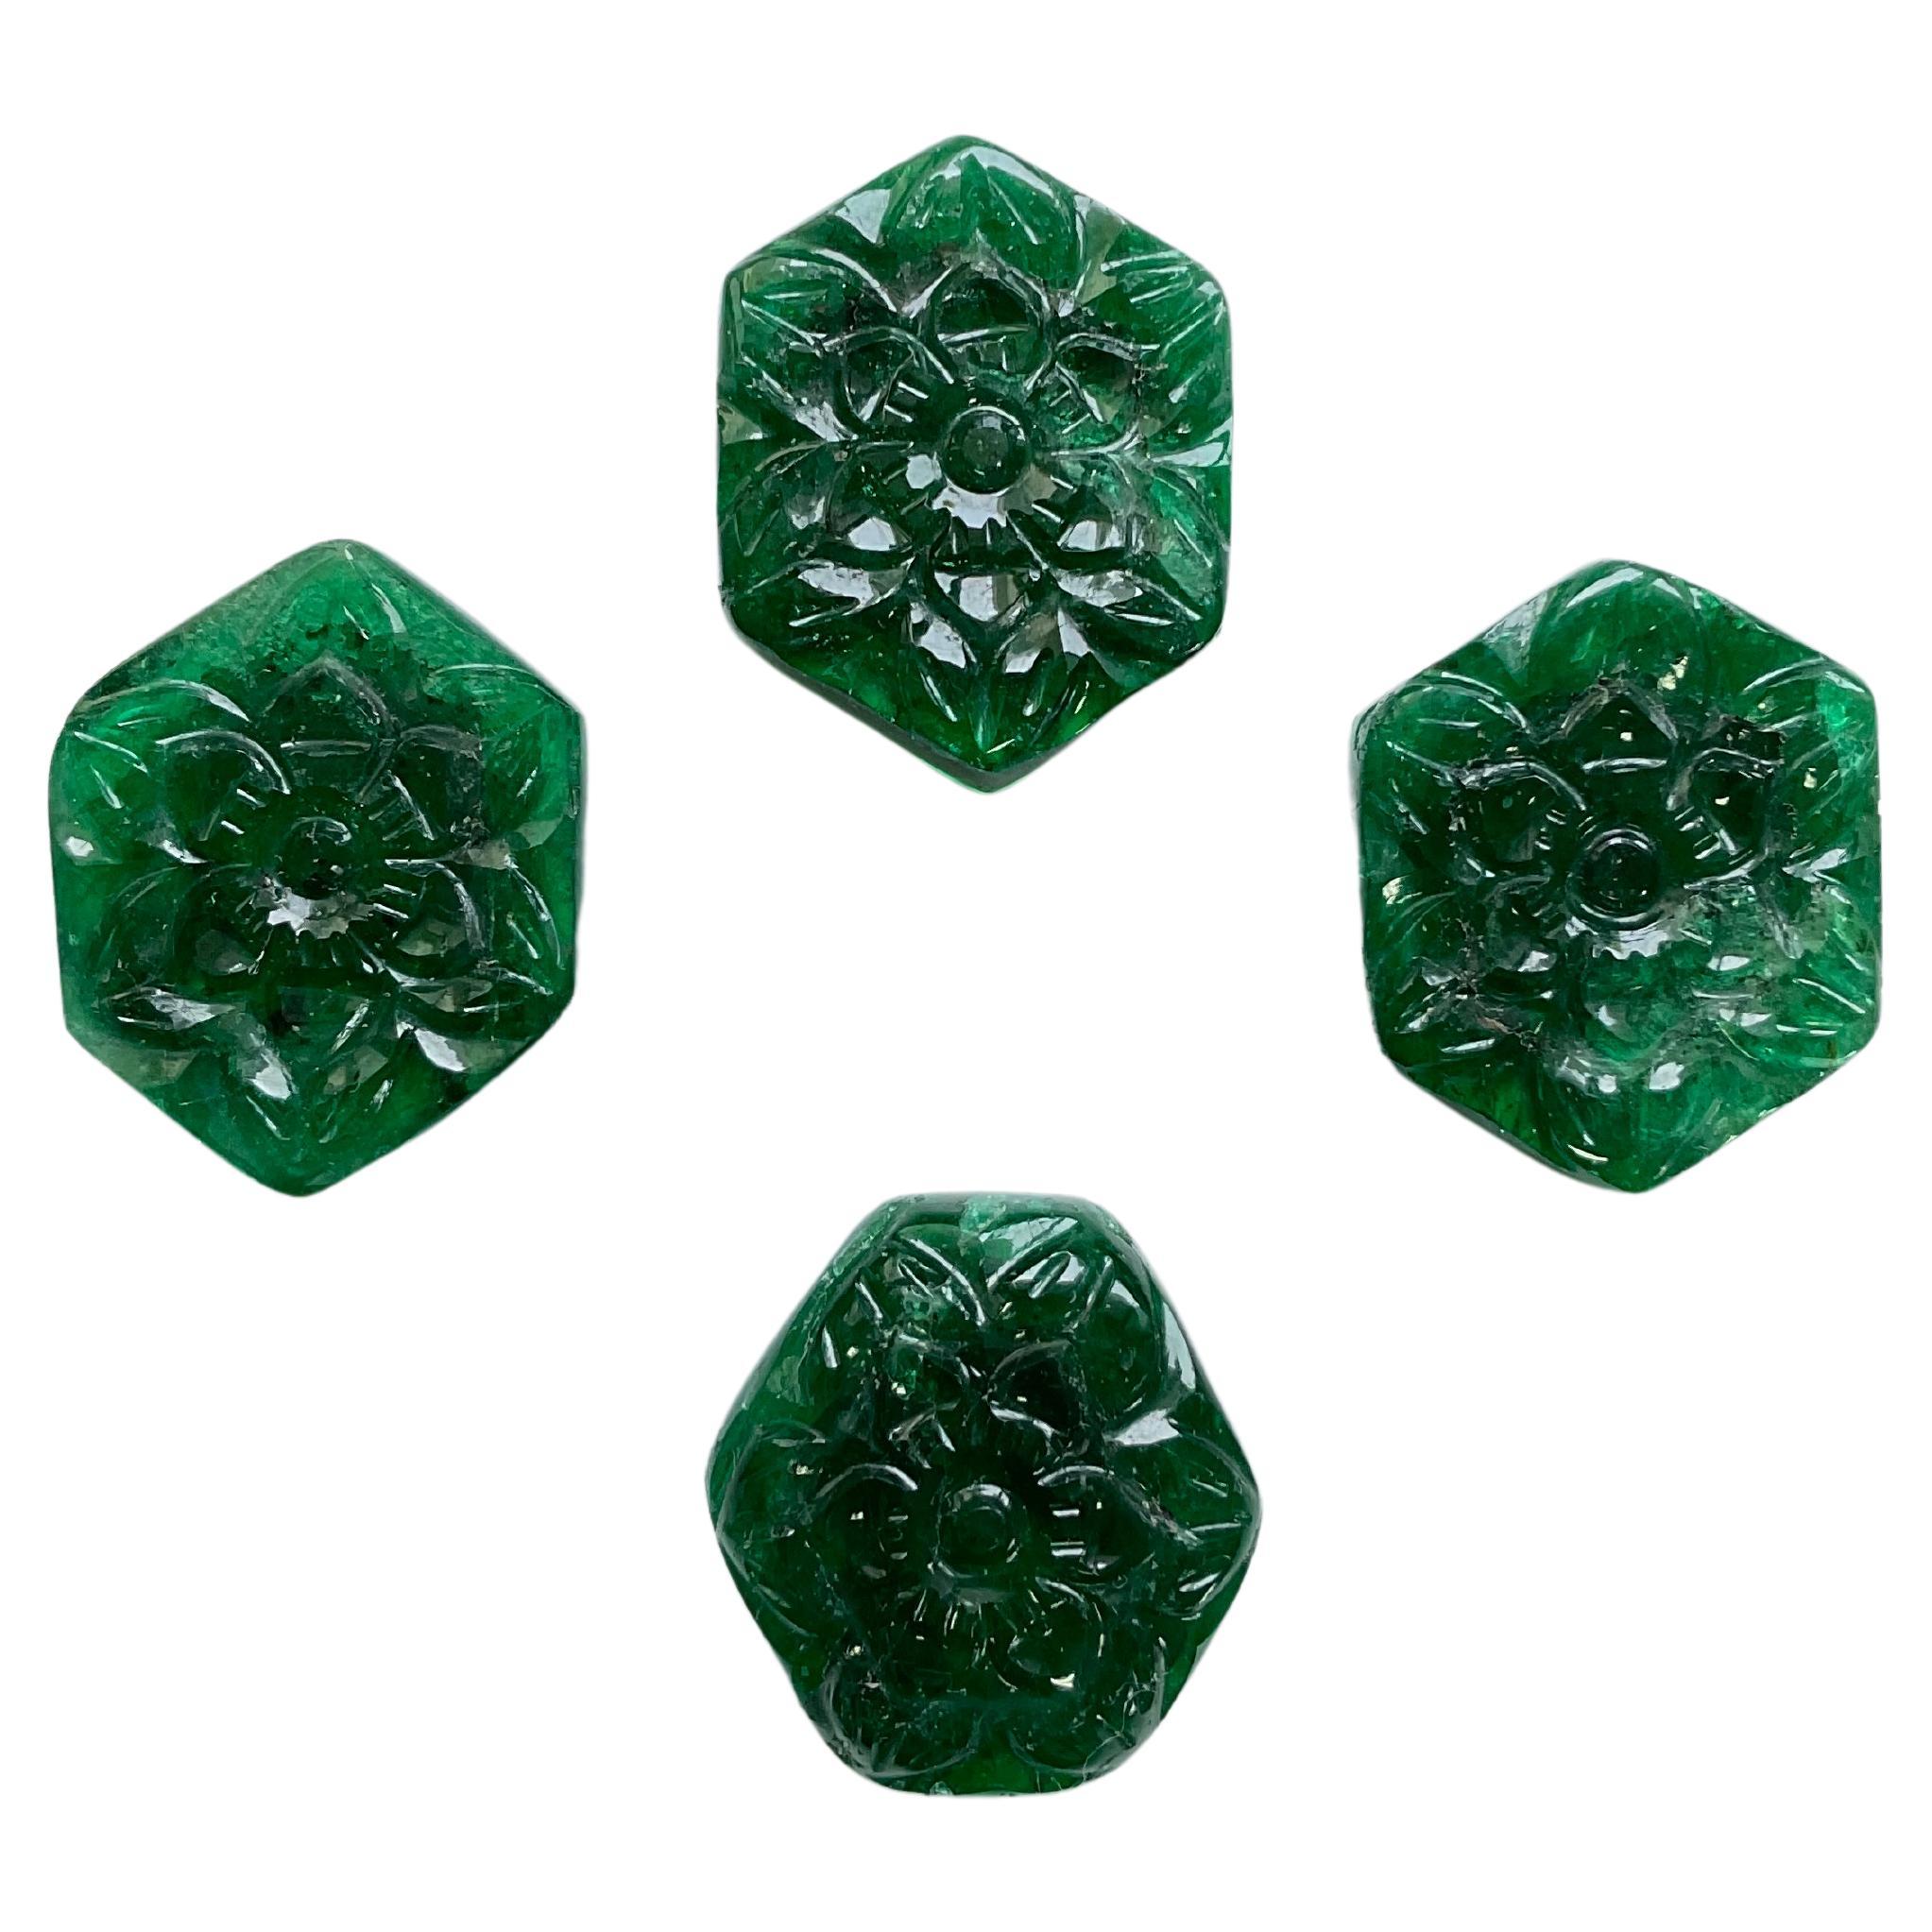 Zambian Emerald Hexagon Carved Fancy Cabochon Loose Gemstone for Jewelry